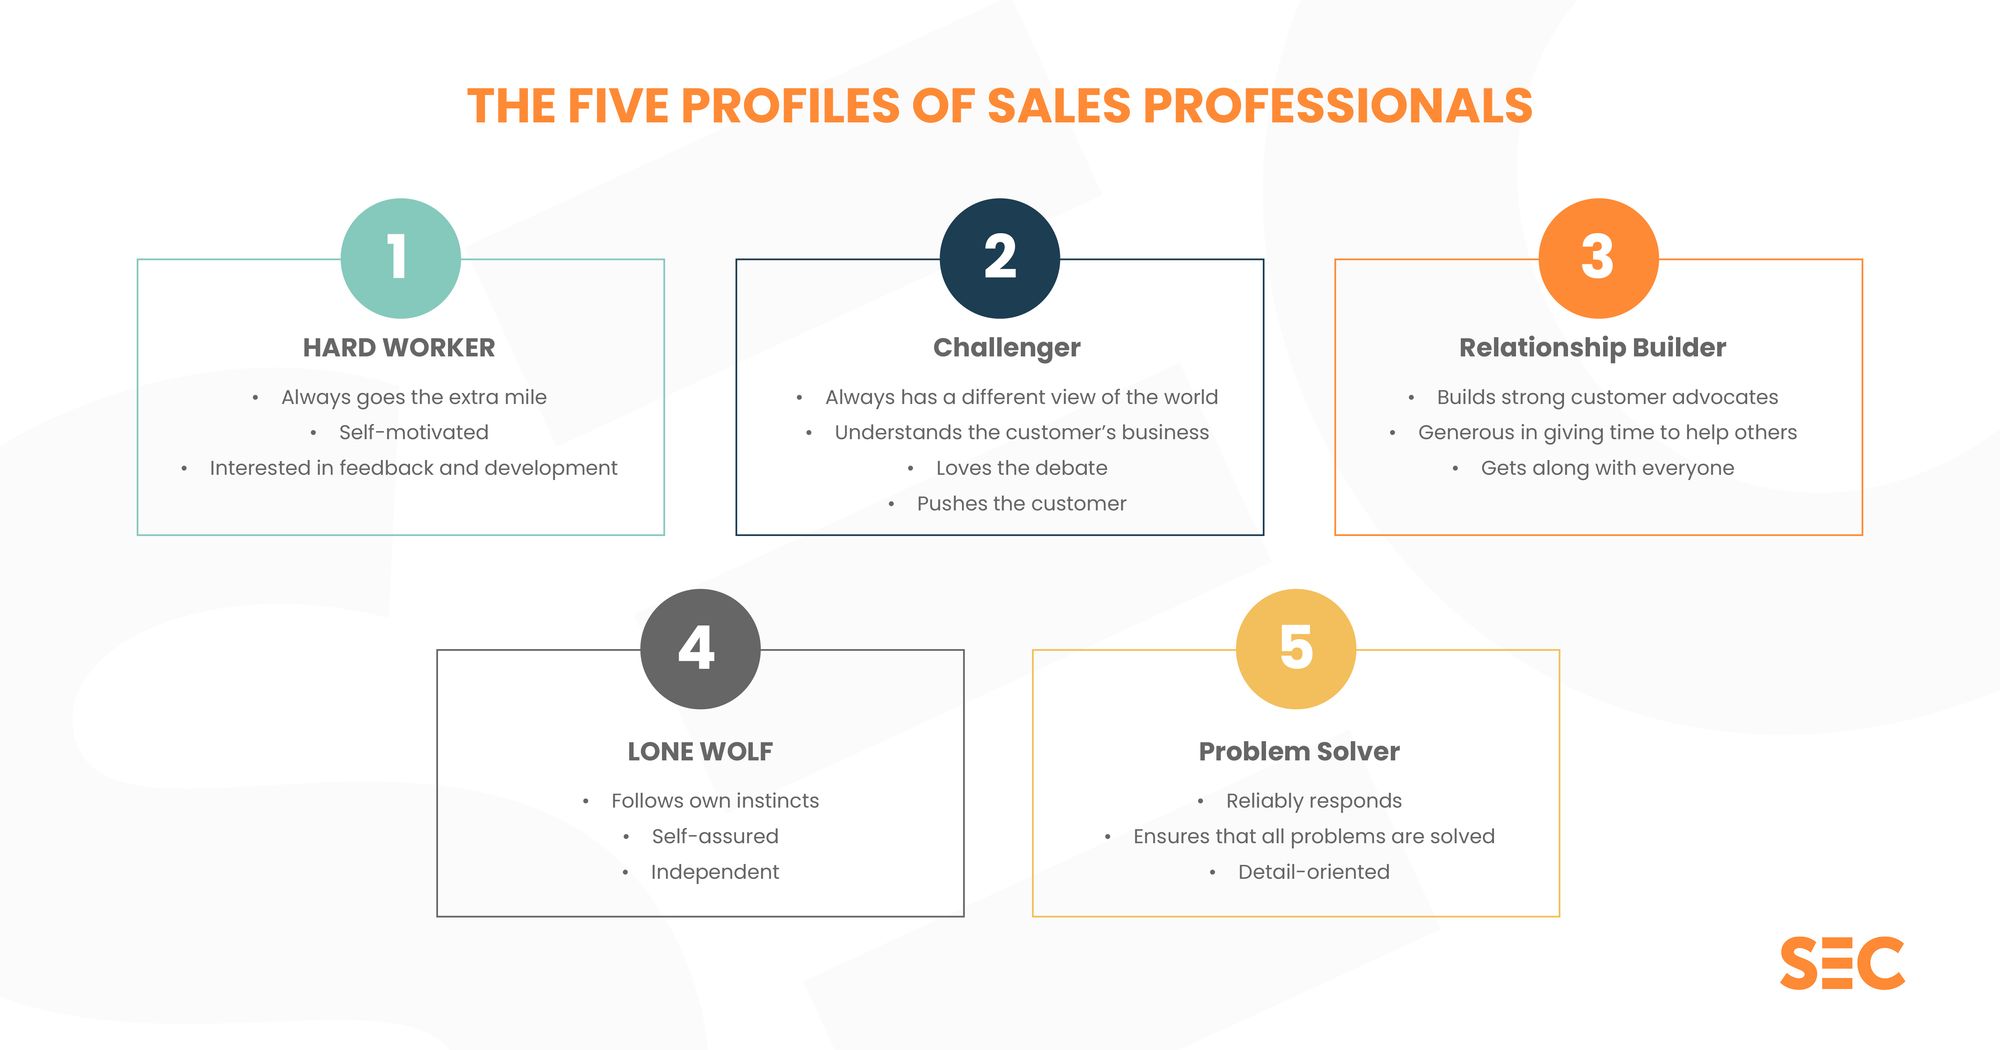 The five profiles of sales professionals according to Challenger: Hard worker, Challenger, Relationship builder, Lone wolf, problem solver